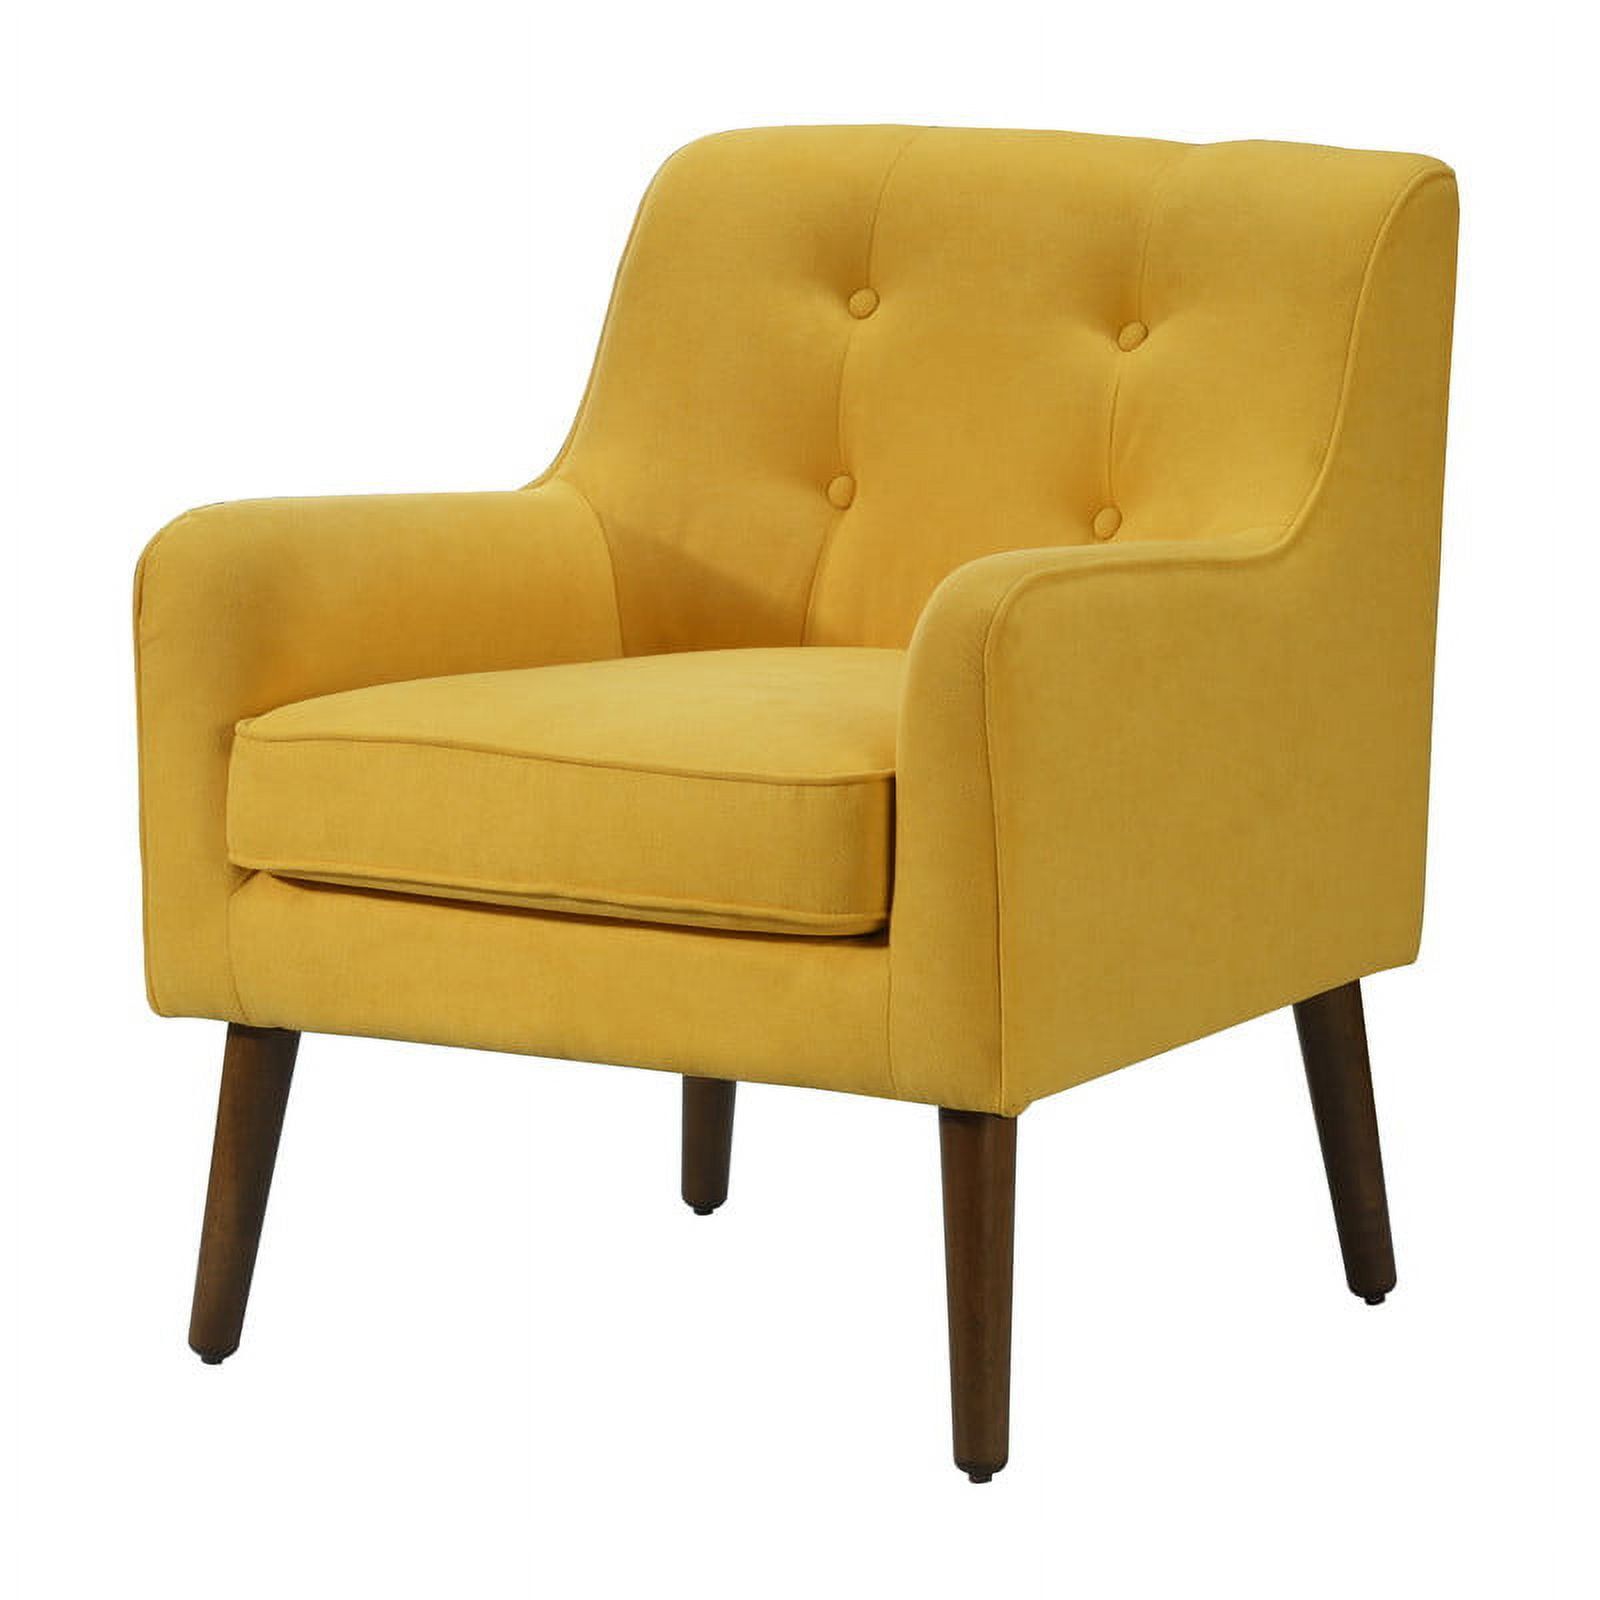 Mid-Century Modern Yellow Fabric Accent Armchair with Button Tufted Back